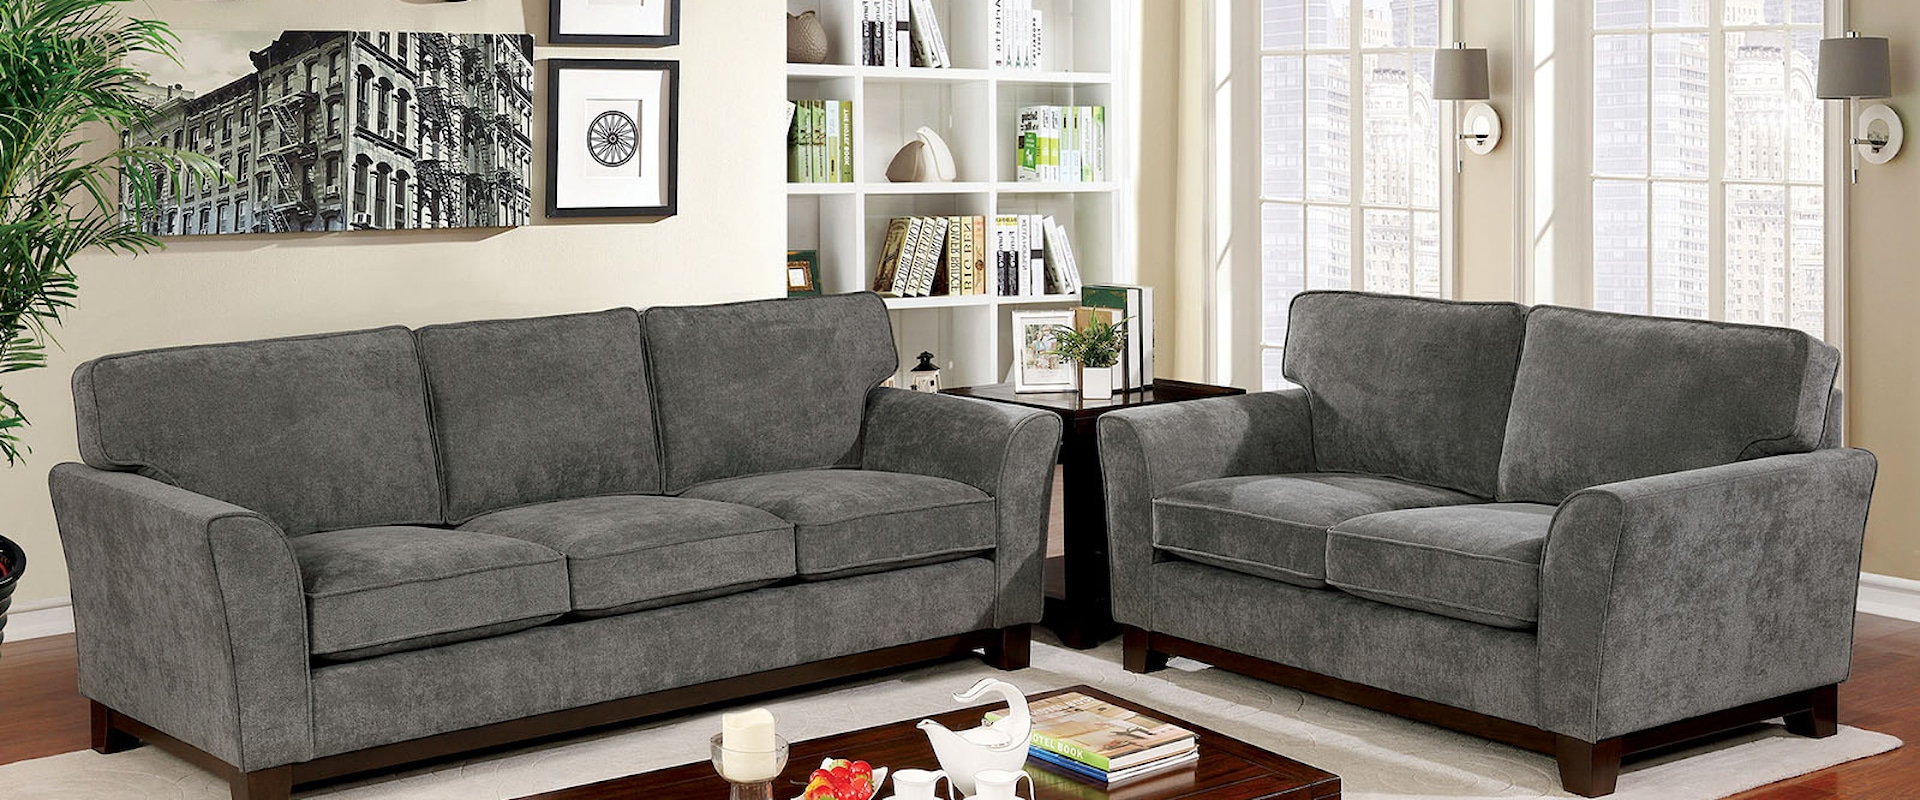 Transitional Sofa and Loveseat